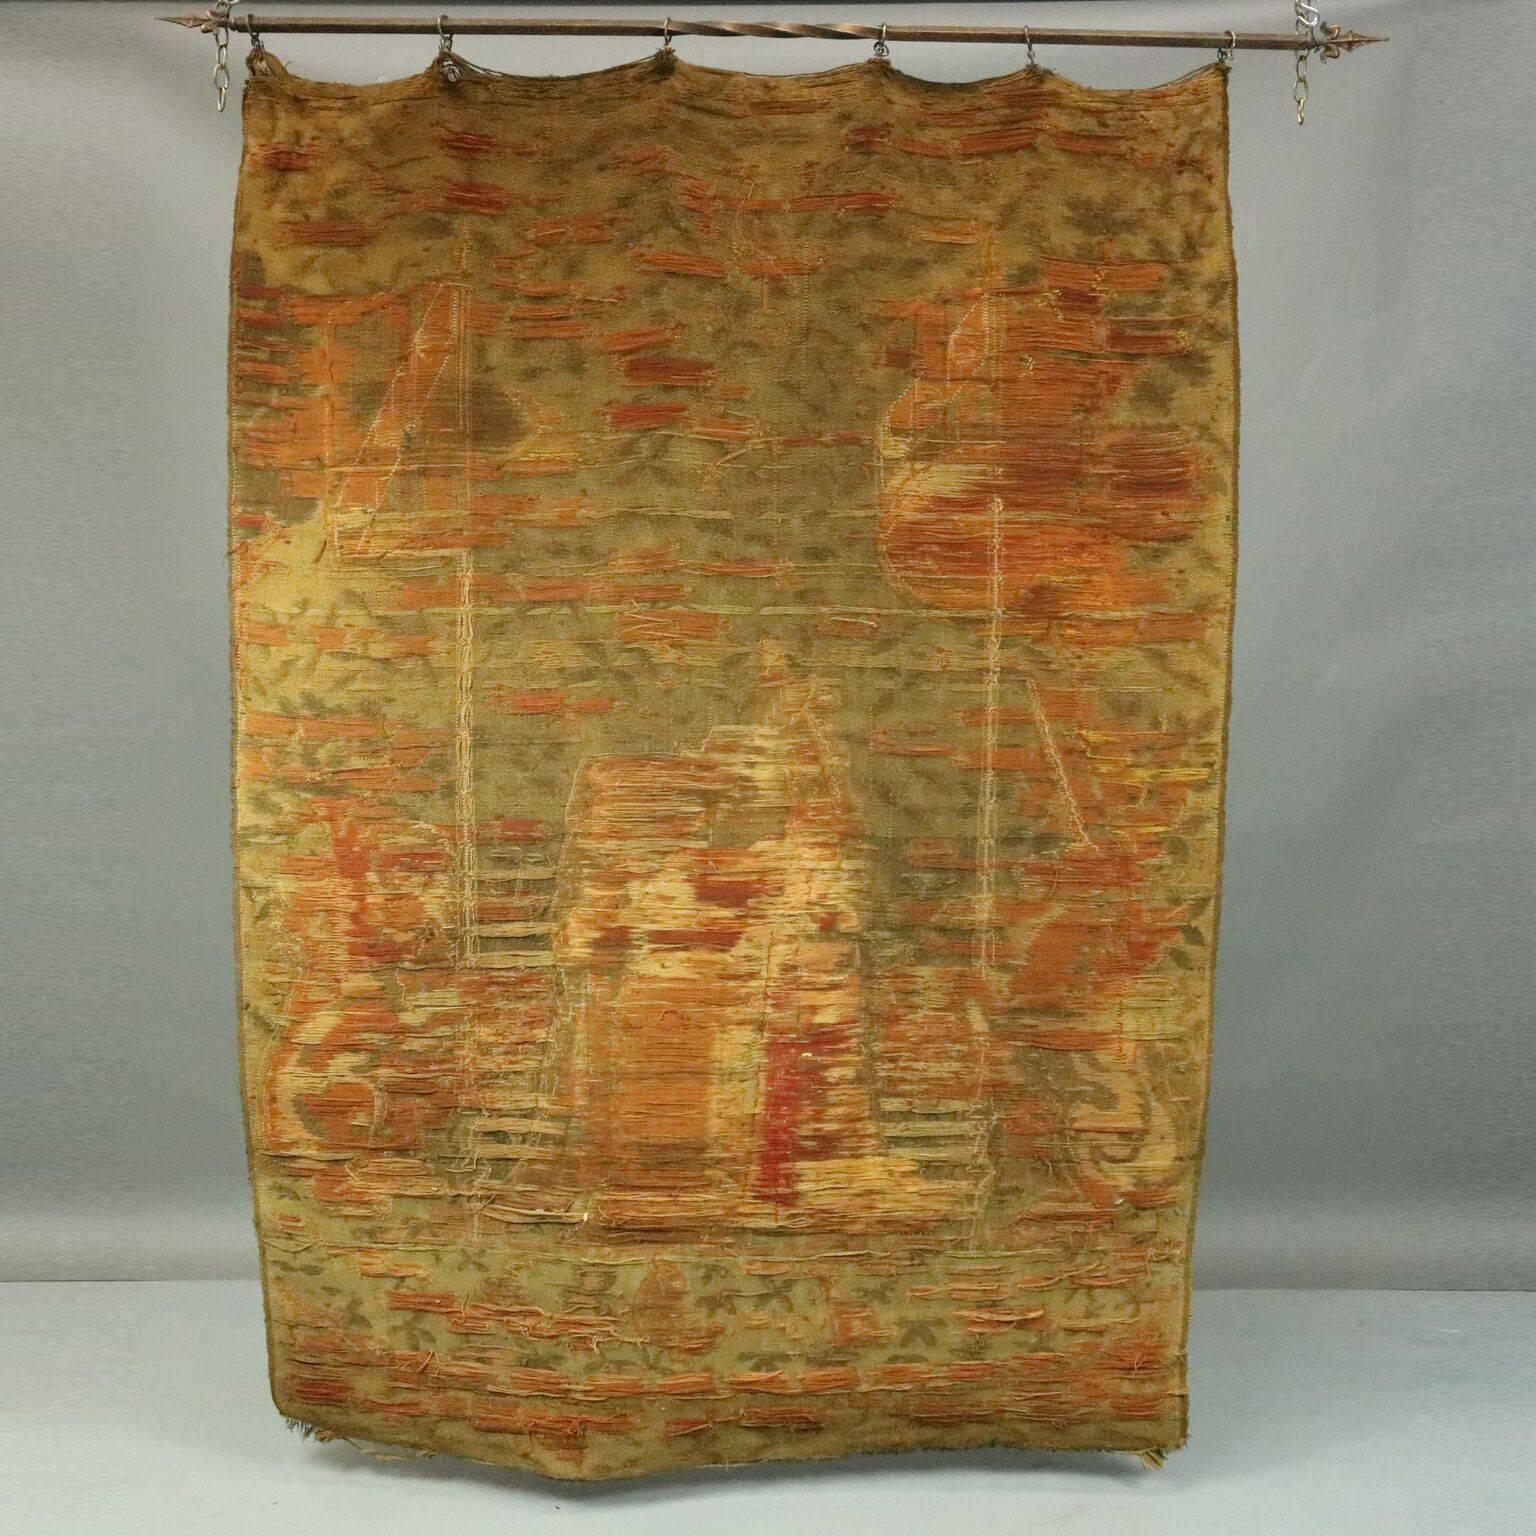 Antique Flemish wool wall tapestry the lady and the unicorn with display rod, circa 1800

Measures: 82